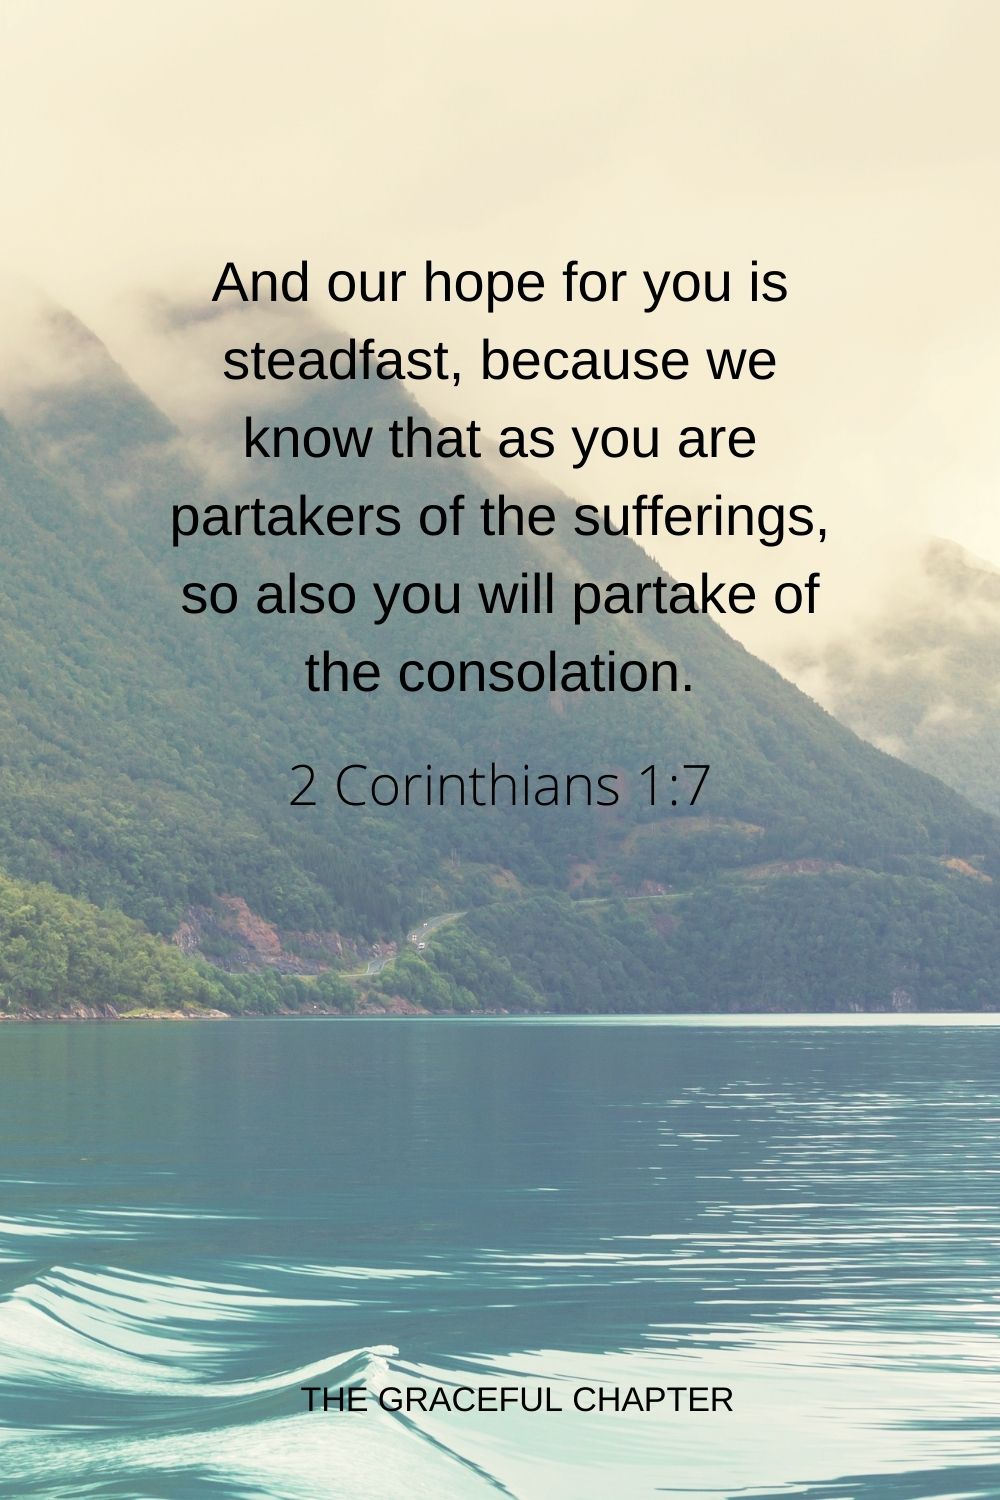 And our hope for you is steadfast, because we know that as you are partakers of the sufferings, so also you will partake of the consolation. 2 Corinthians 1:7